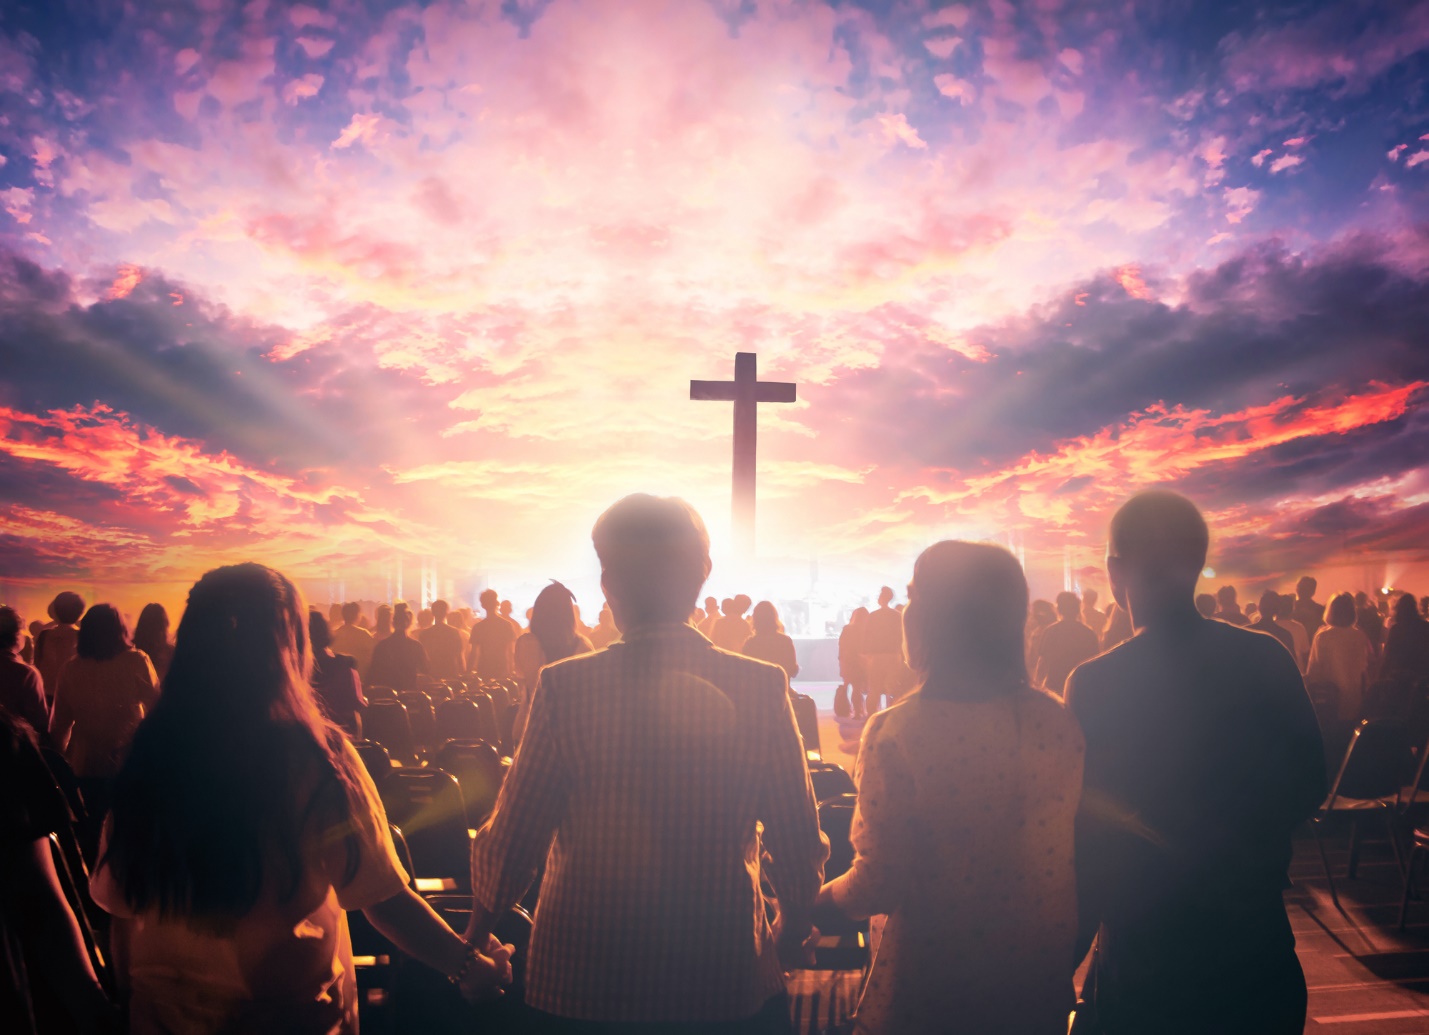 A group of people standing in front of a cross on a hill

Description automatically generated with low confidence